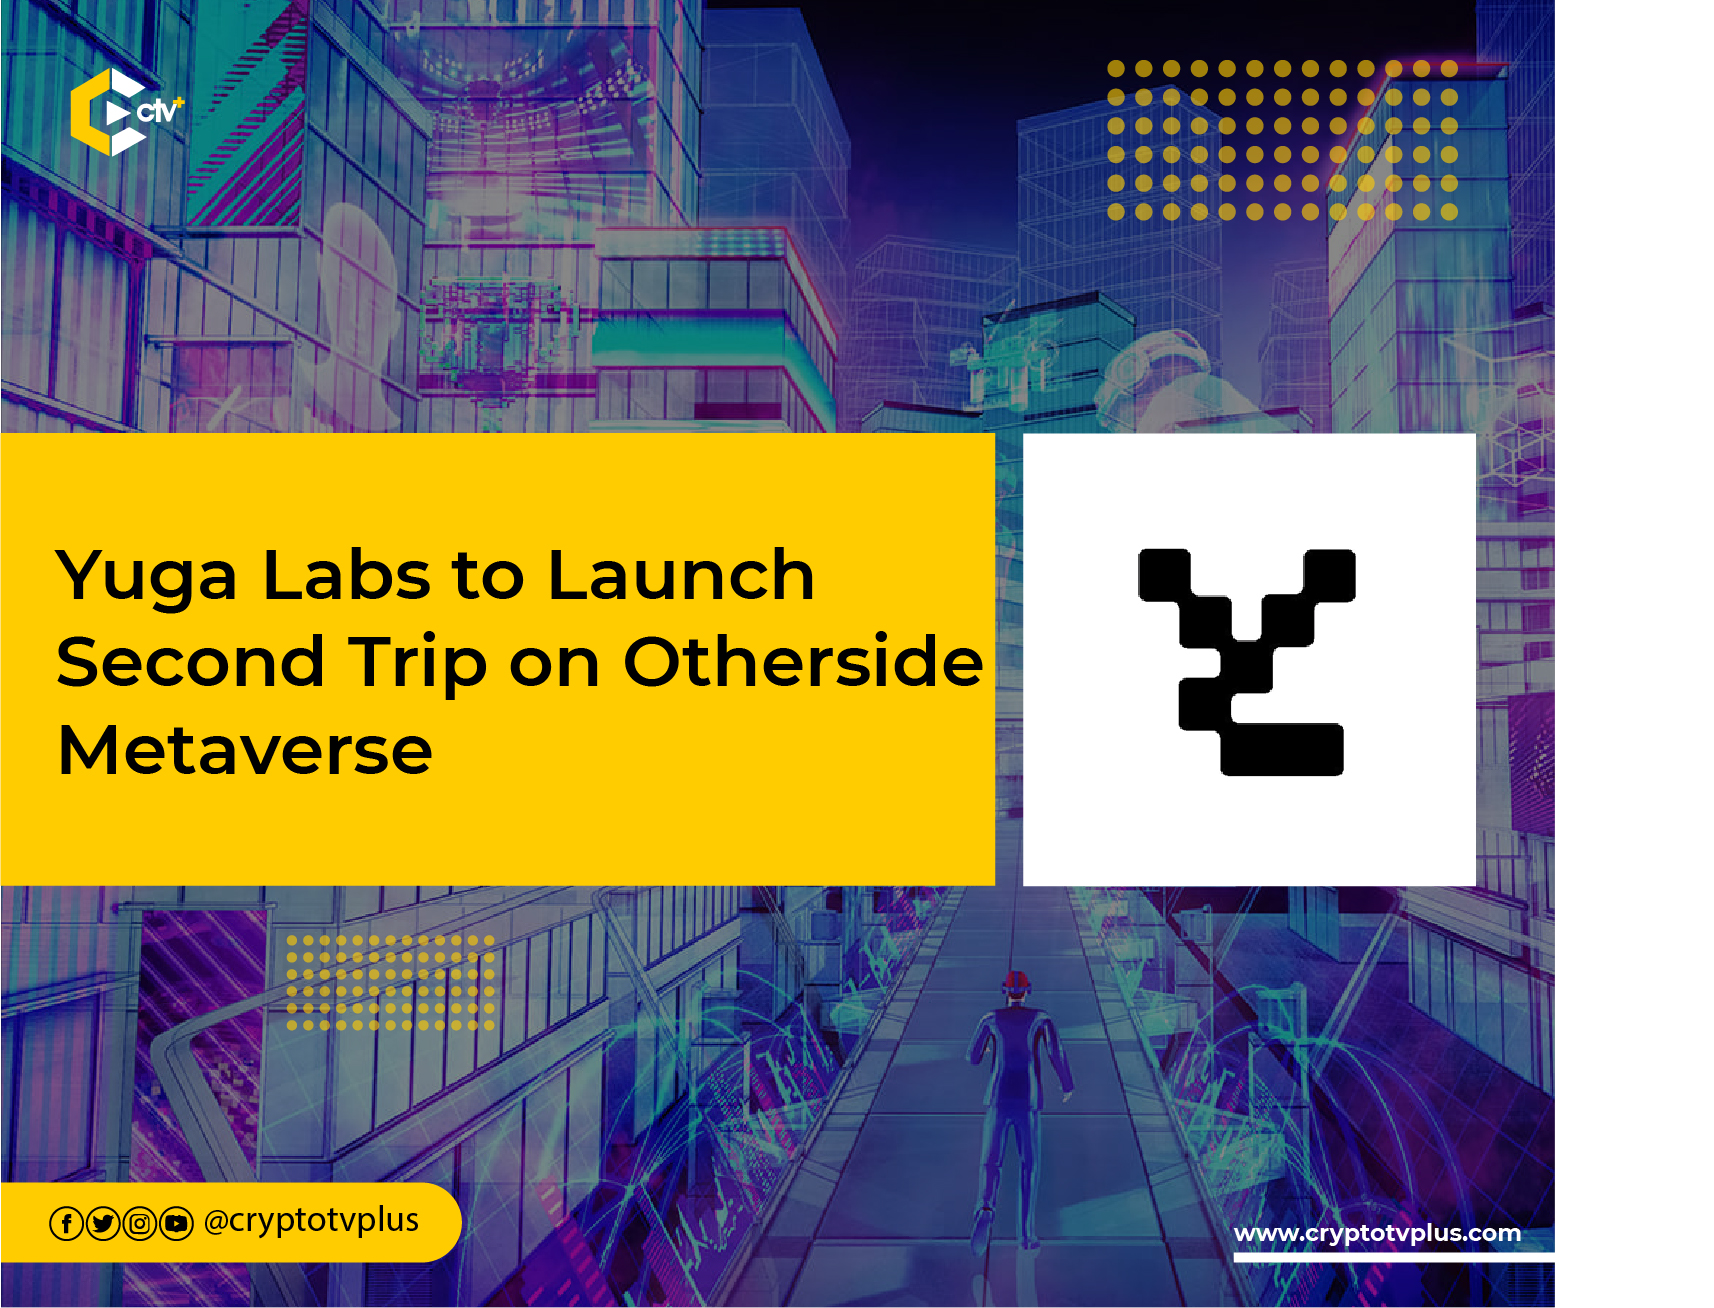 Yuga Labs to Launch Second Trip on Otherside Metaverse